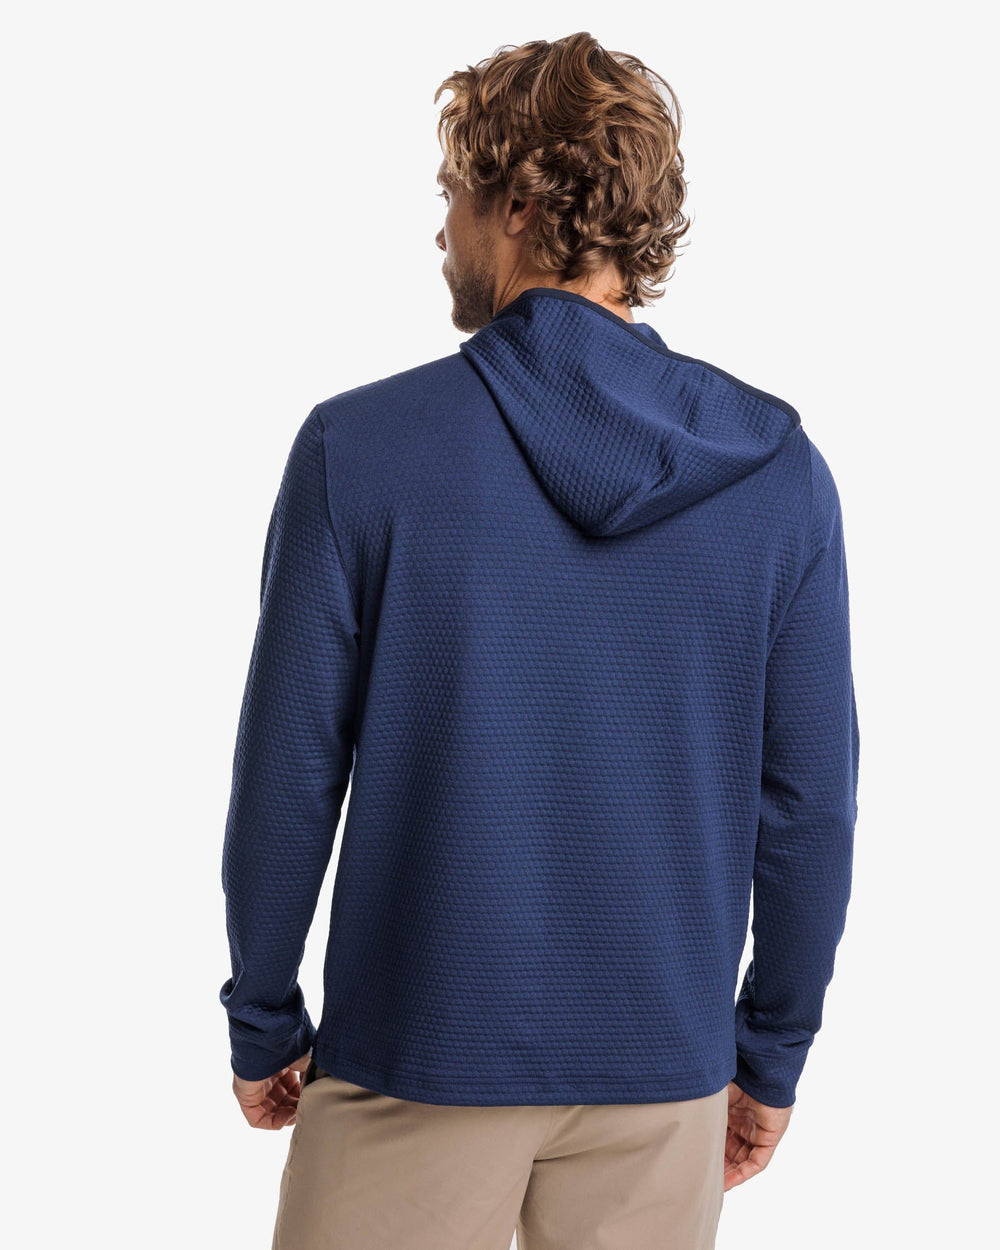 The back view of the Southern Tide Scuttle Heather Performance Quarter Zip Hoodie by Southern Tide - Heather True Navy